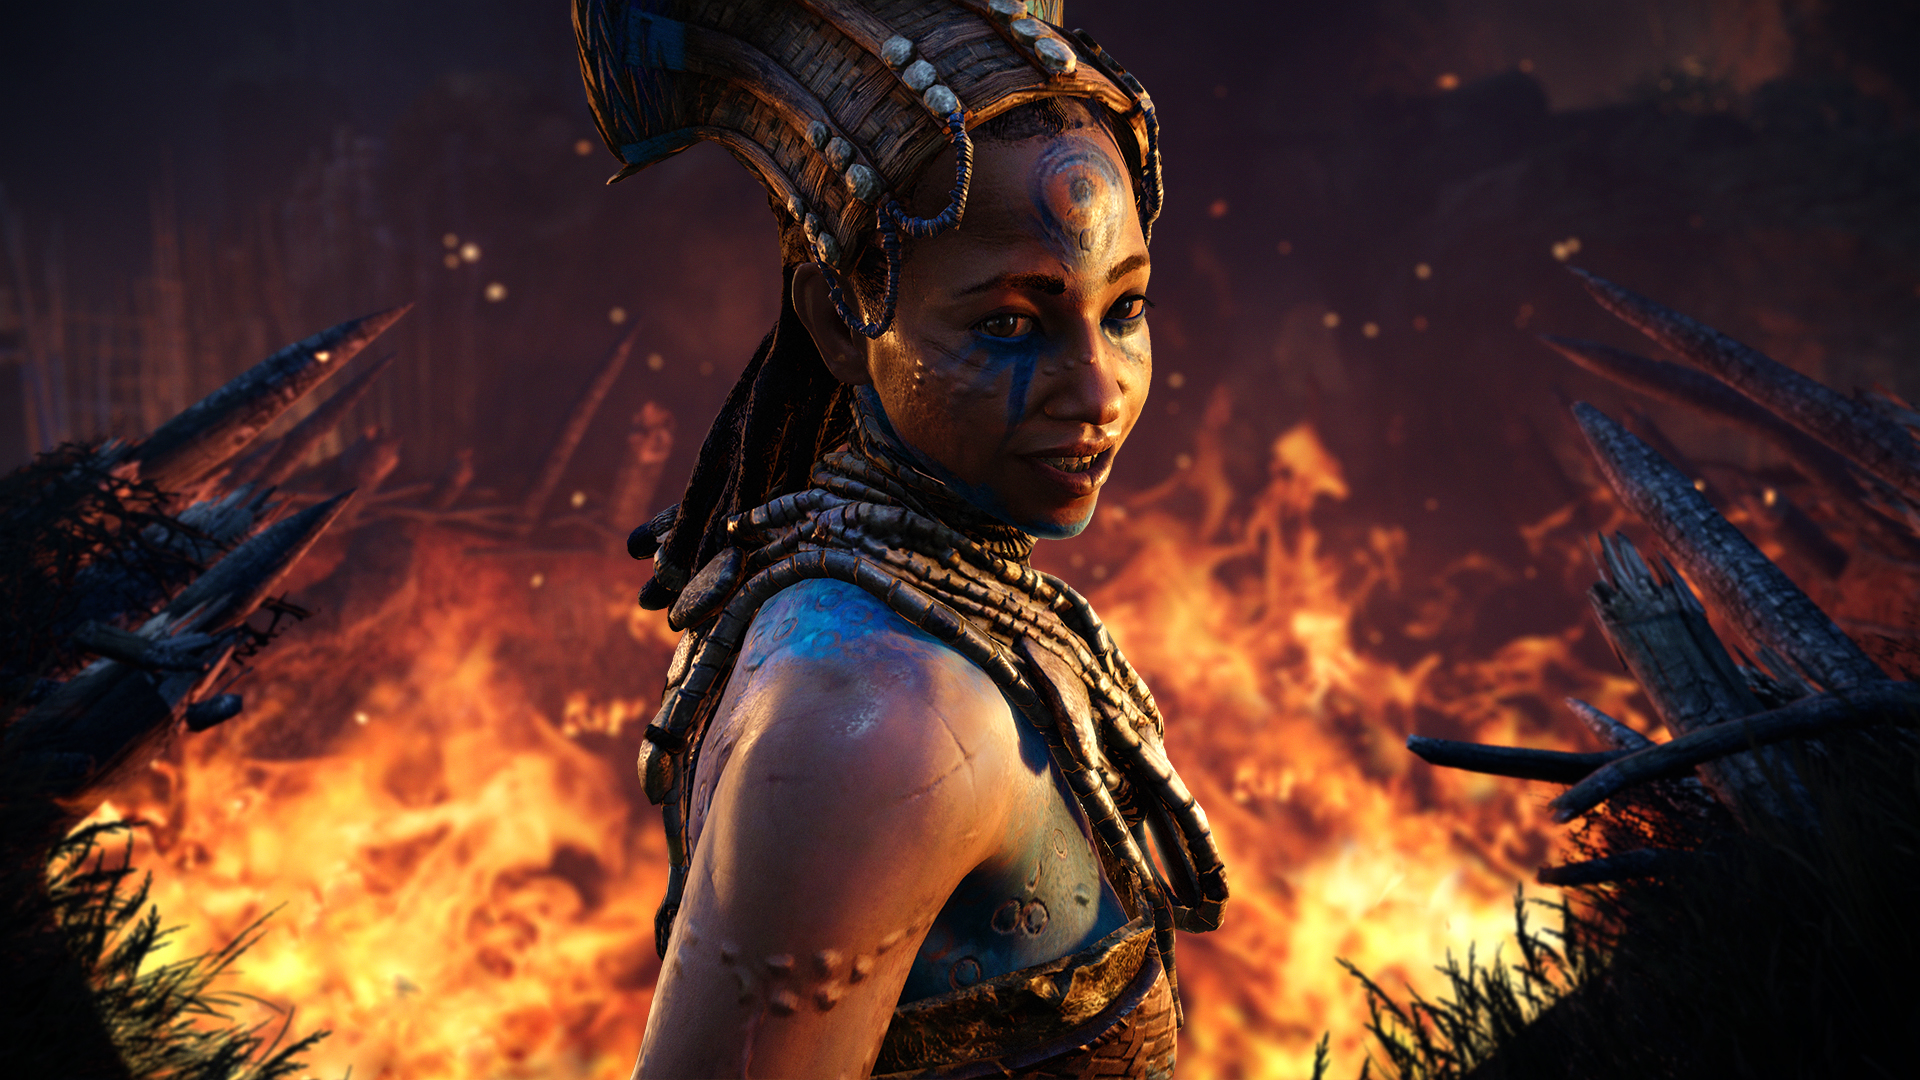 chanel danielle lepore recommends nudity in far cry 4 pic